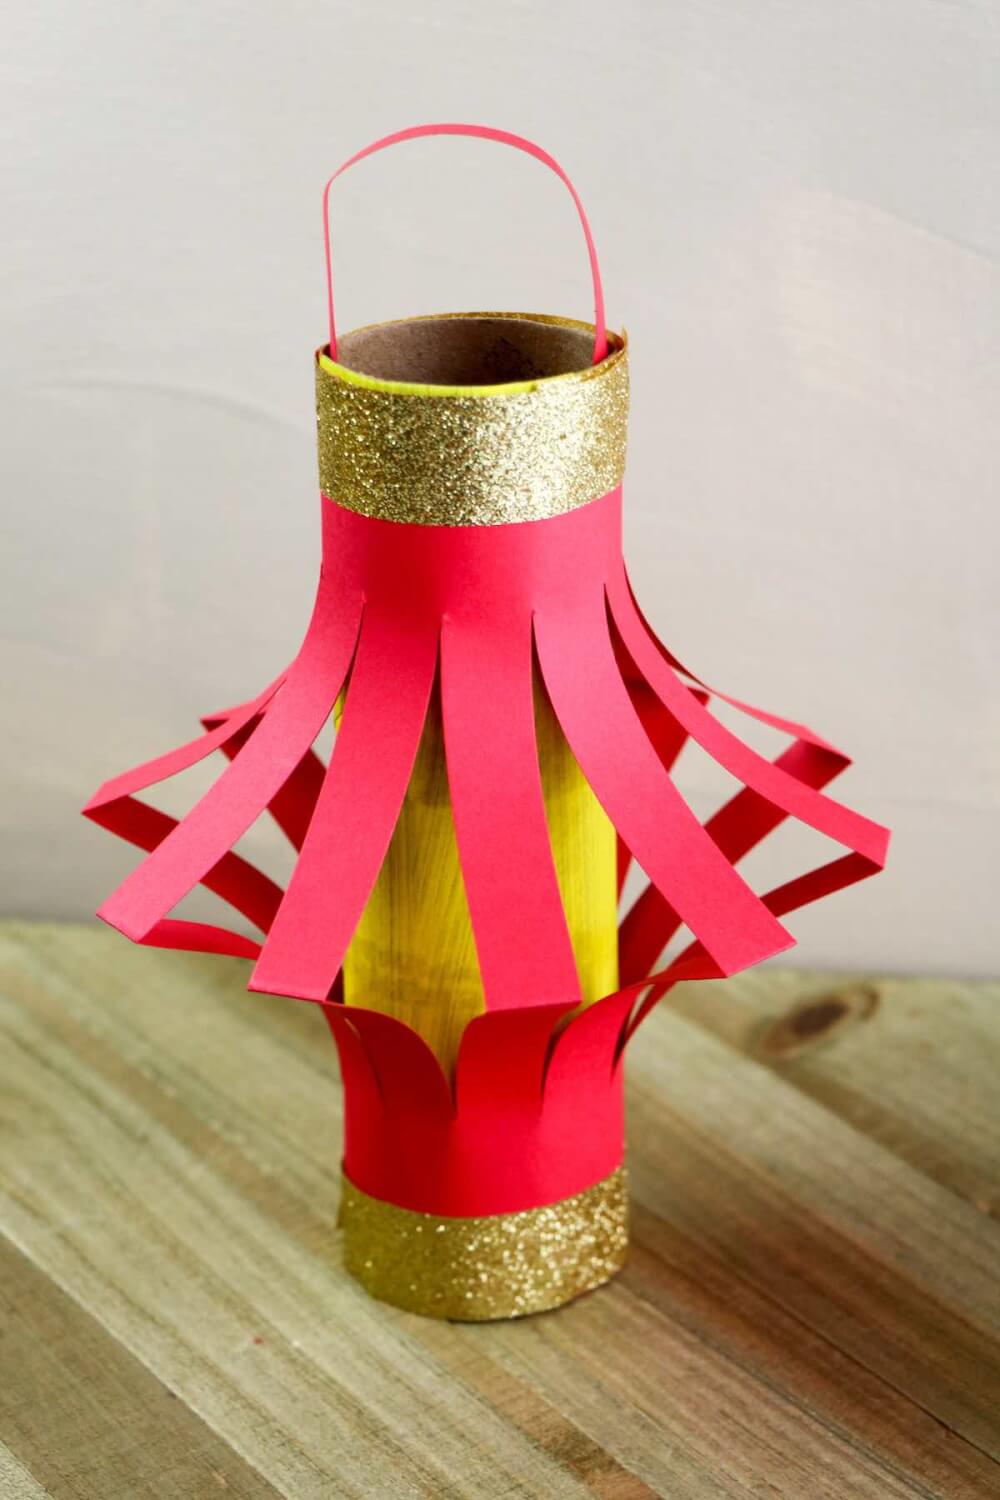 How to Make a Chinese New Year Lantern from Red Envelopes - Too Much Love